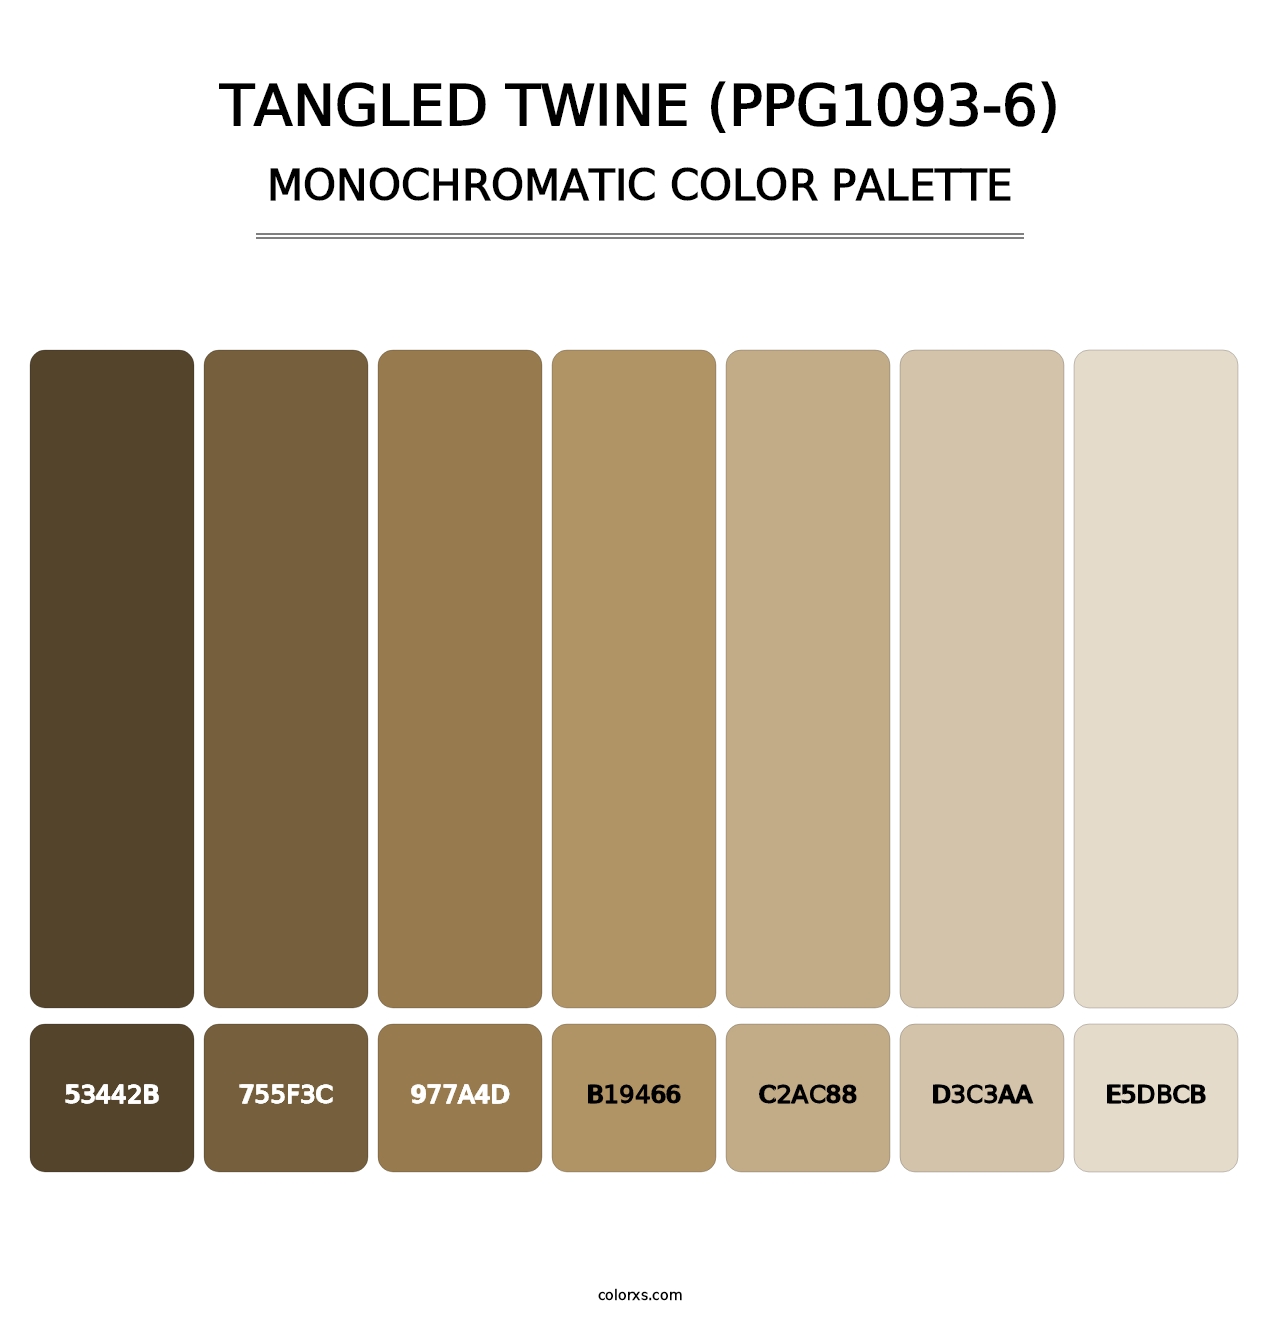 Tangled Twine (PPG1093-6) - Monochromatic Color Palette